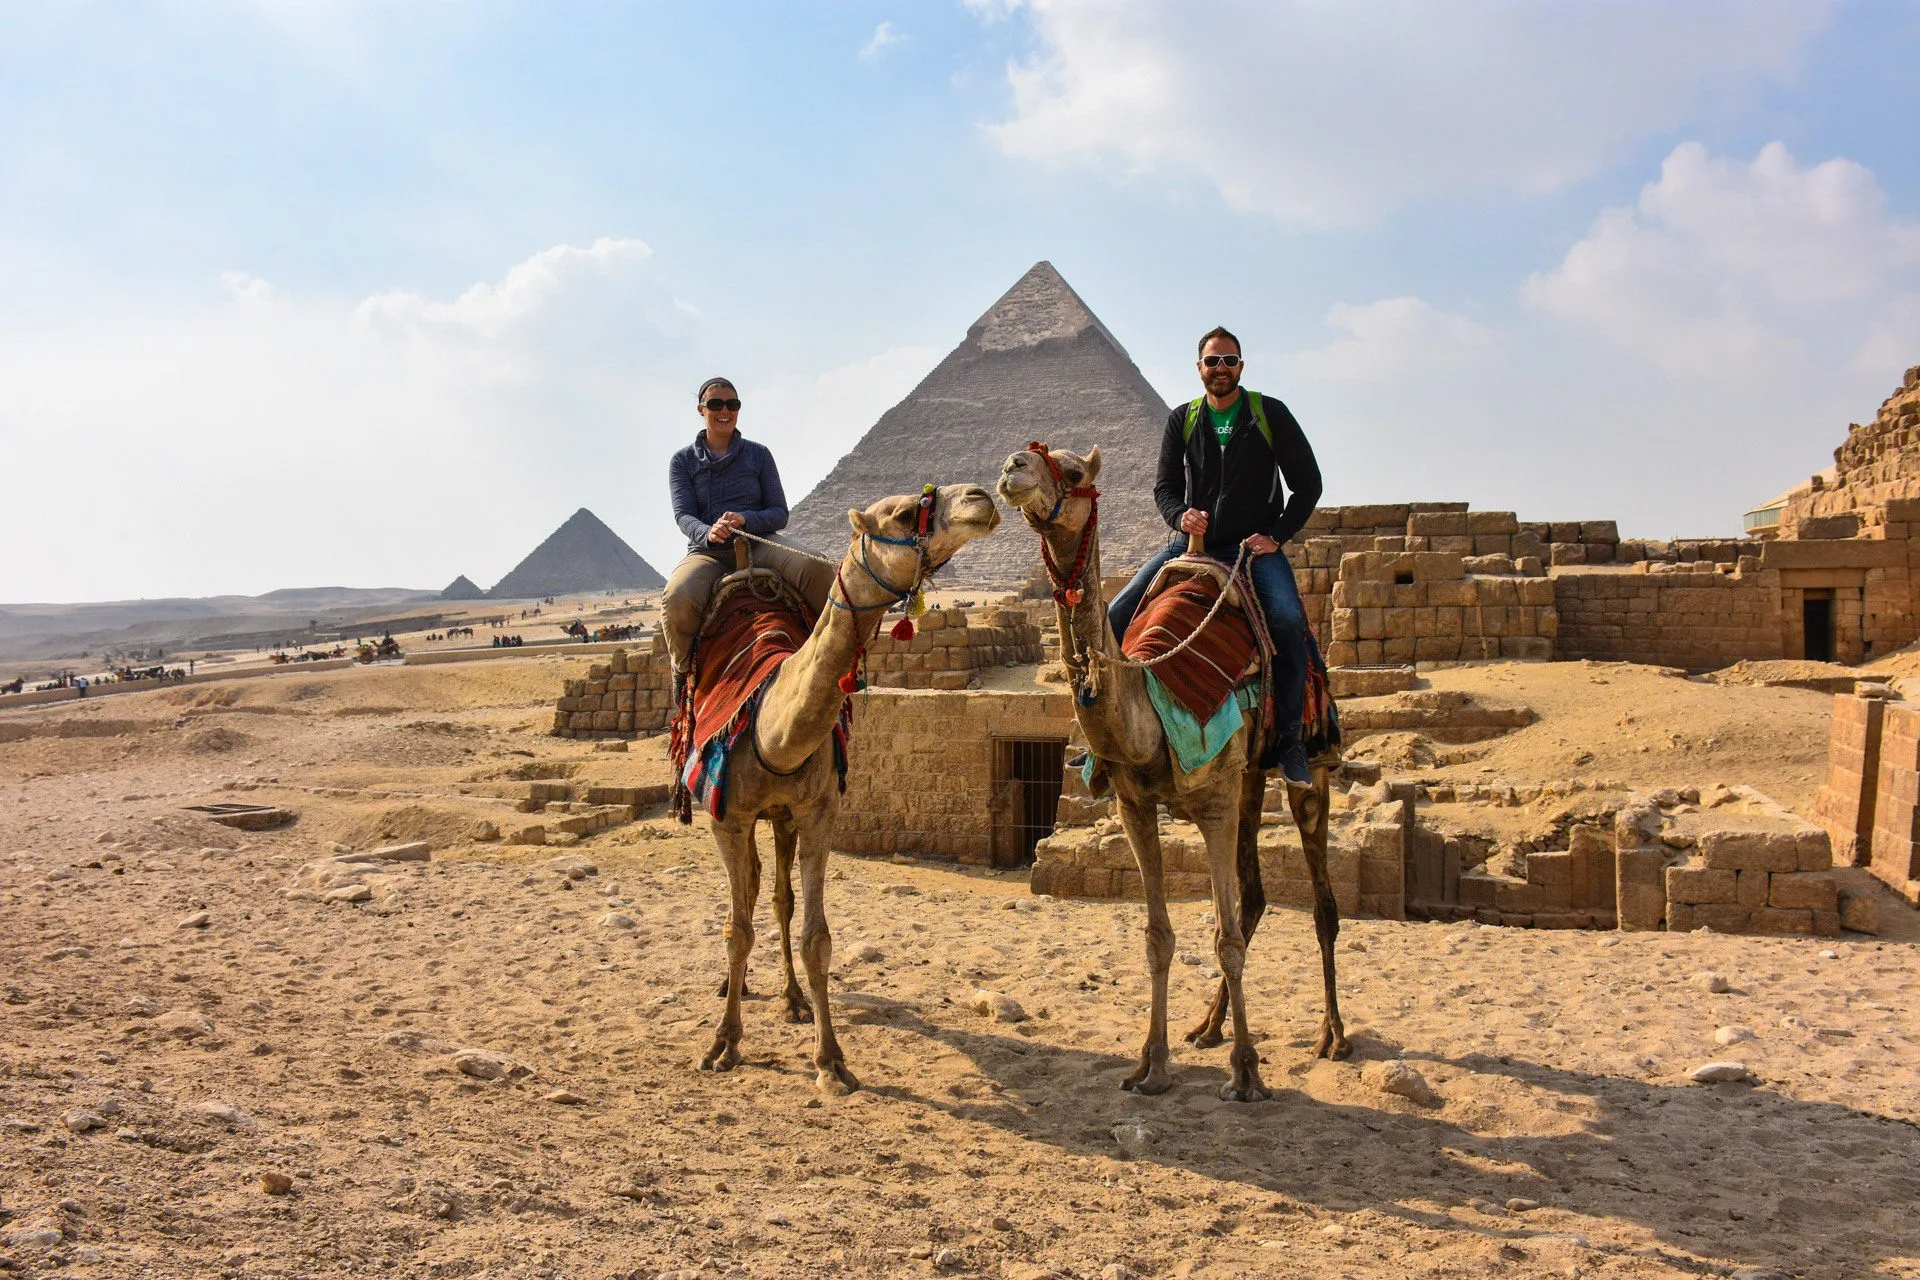 Exploring the Pyramids of Egypt.